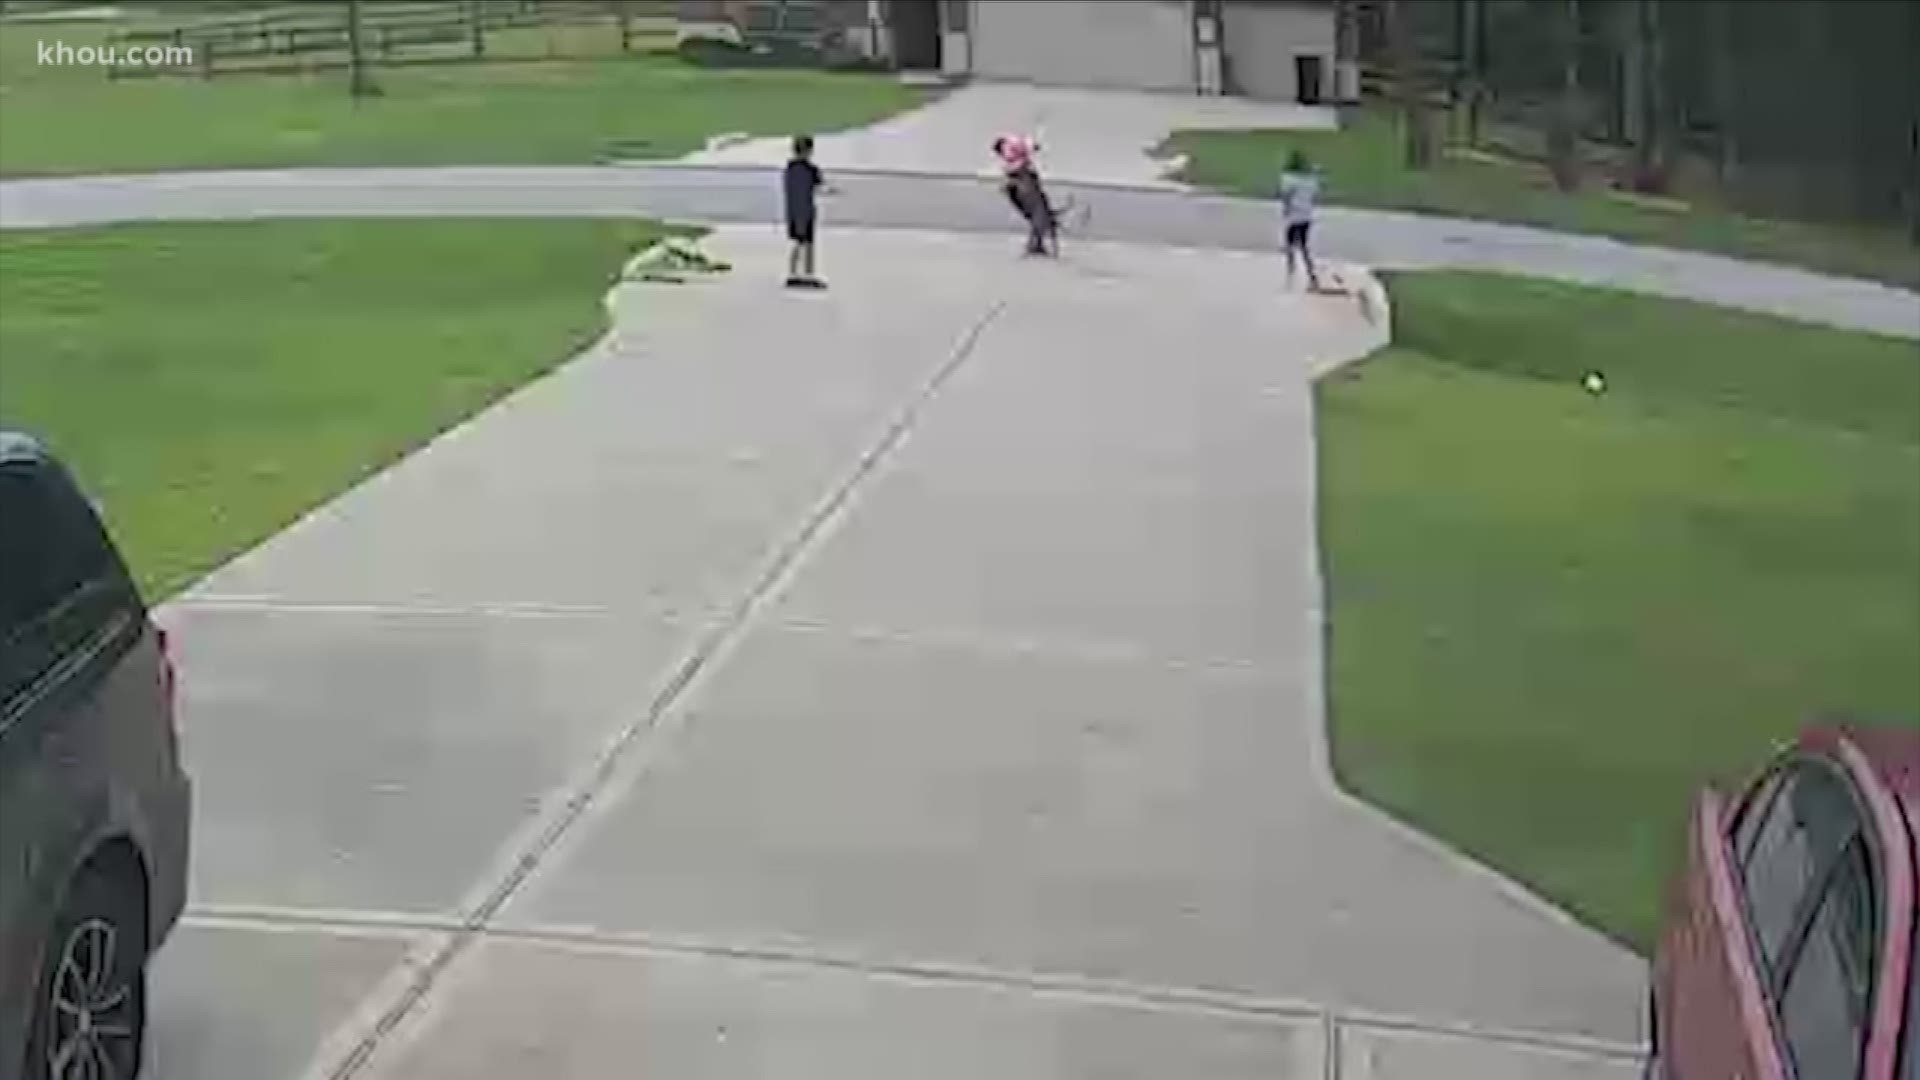 Thanks to the heroic action of a neighbor, a 6-year-old in Conroe is alive after being attacked by a pit bull. That 19-year-old neighbor heard the boy's screams, jumped out of a car and rushed to save him.